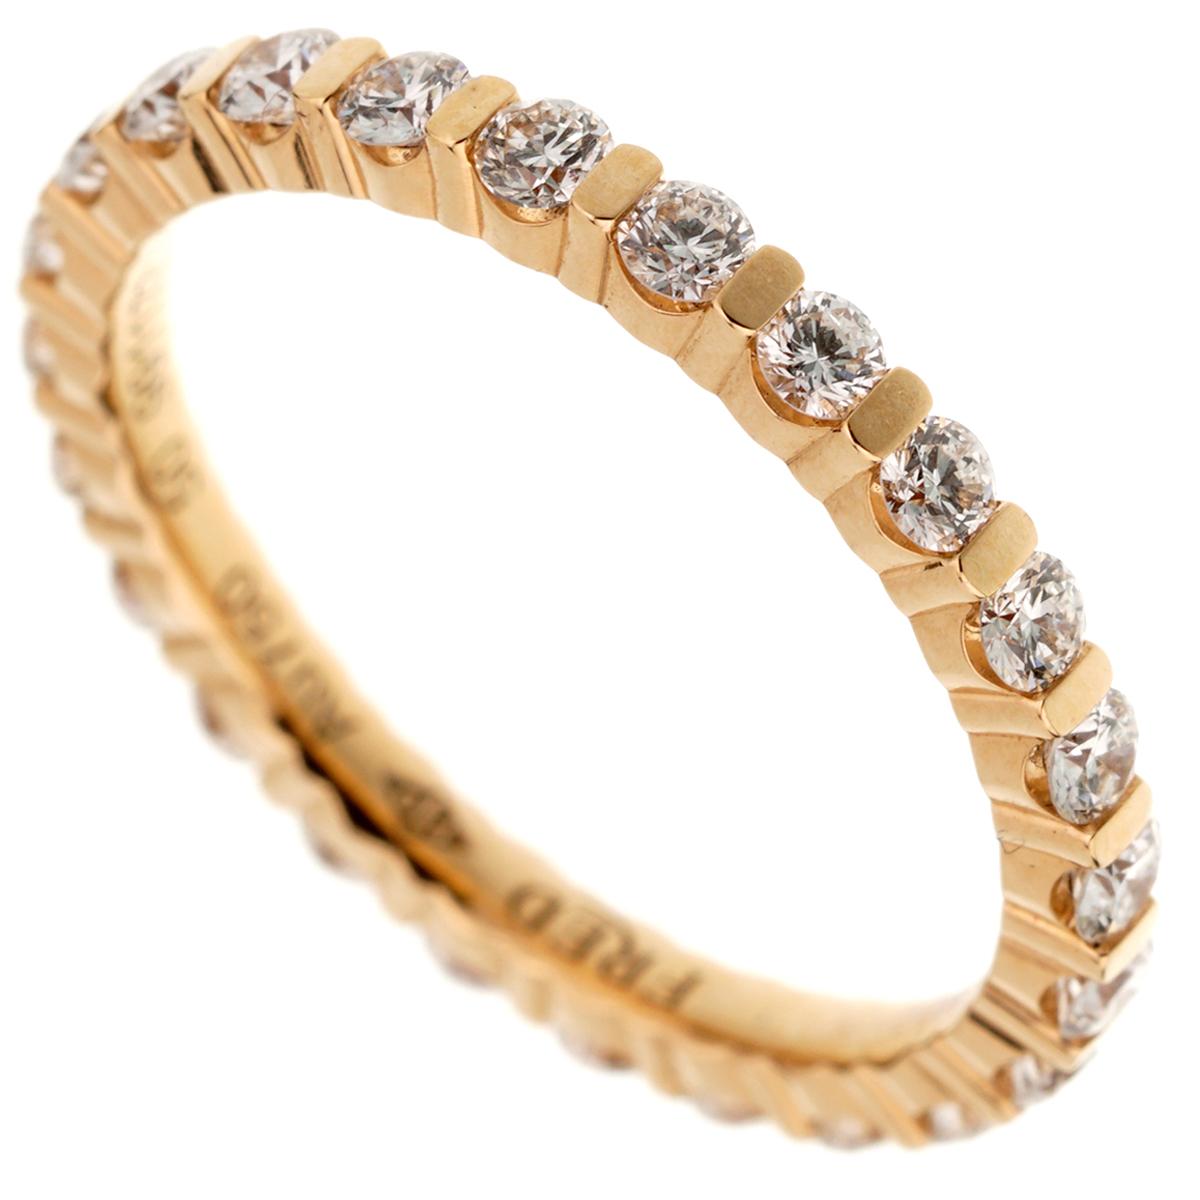 A stunning Fred of Paris diamond eternity ring showcasing the finest round brilliant cut diamonds set in rose gold. The ring measures a size 5.